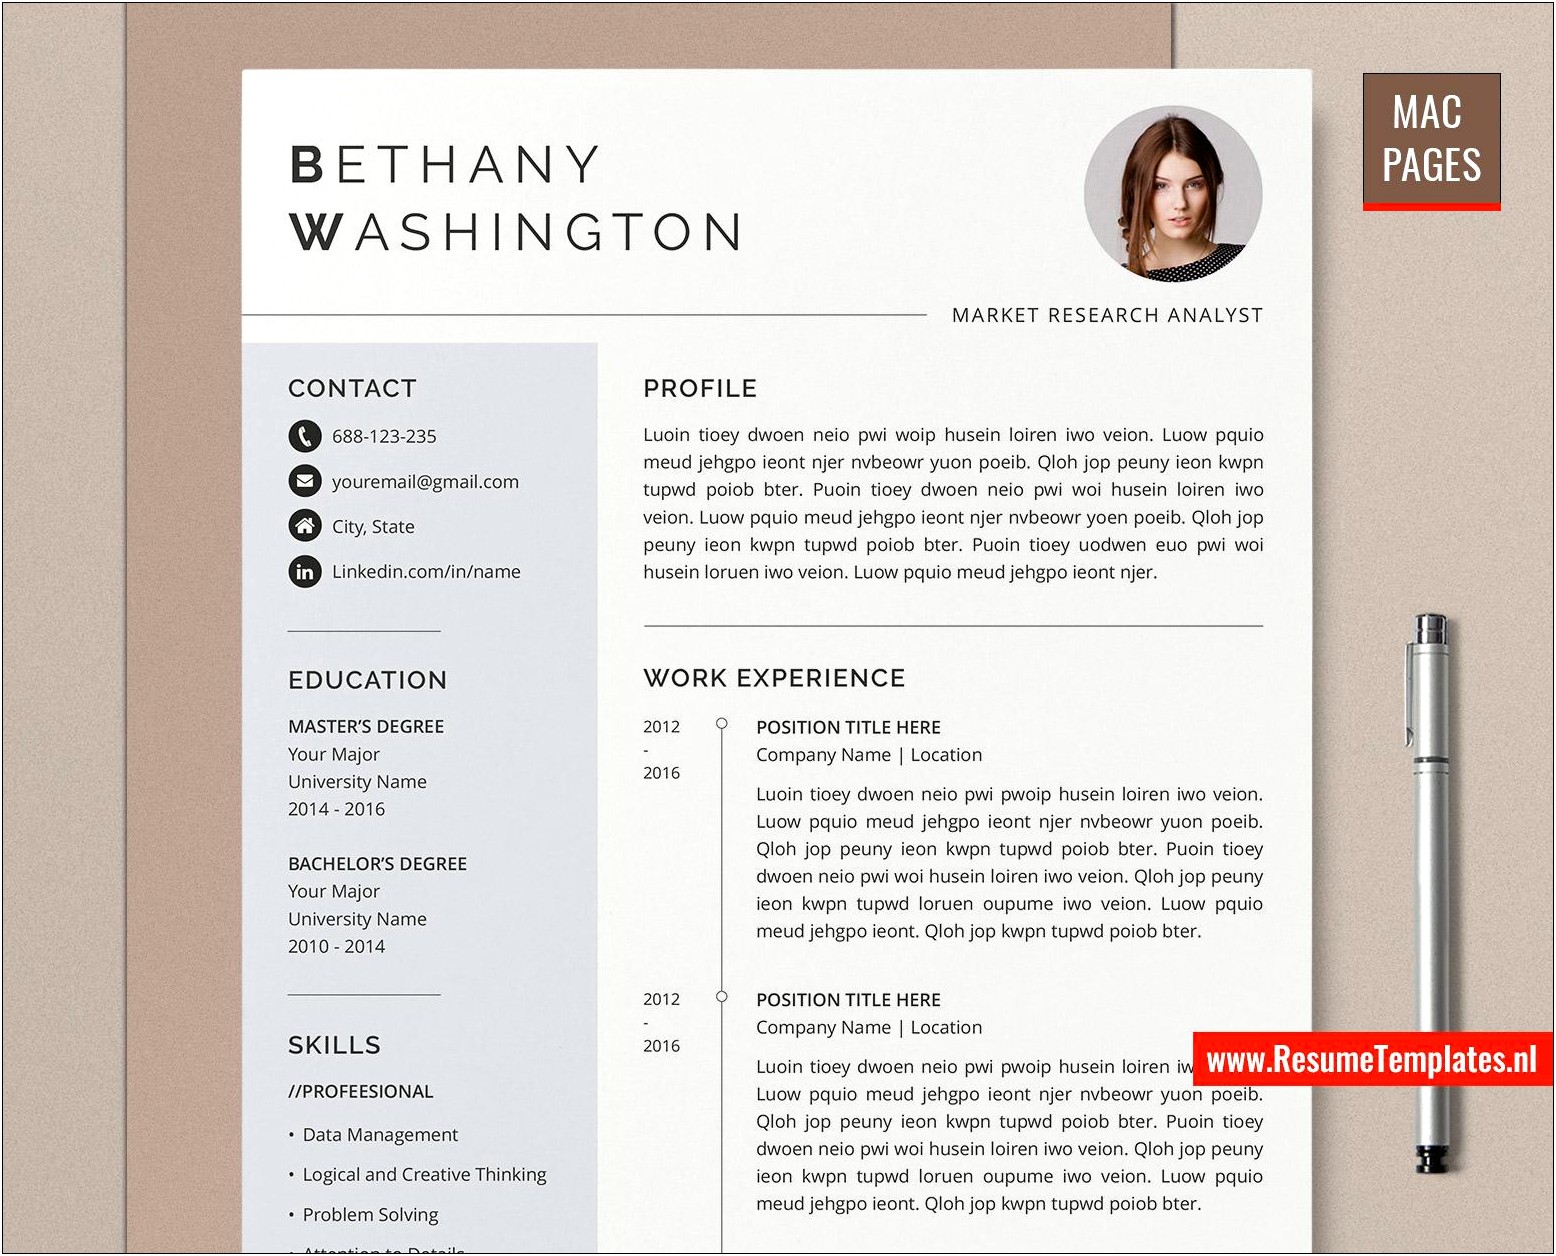 Free Mac Pages Resume Templates Download